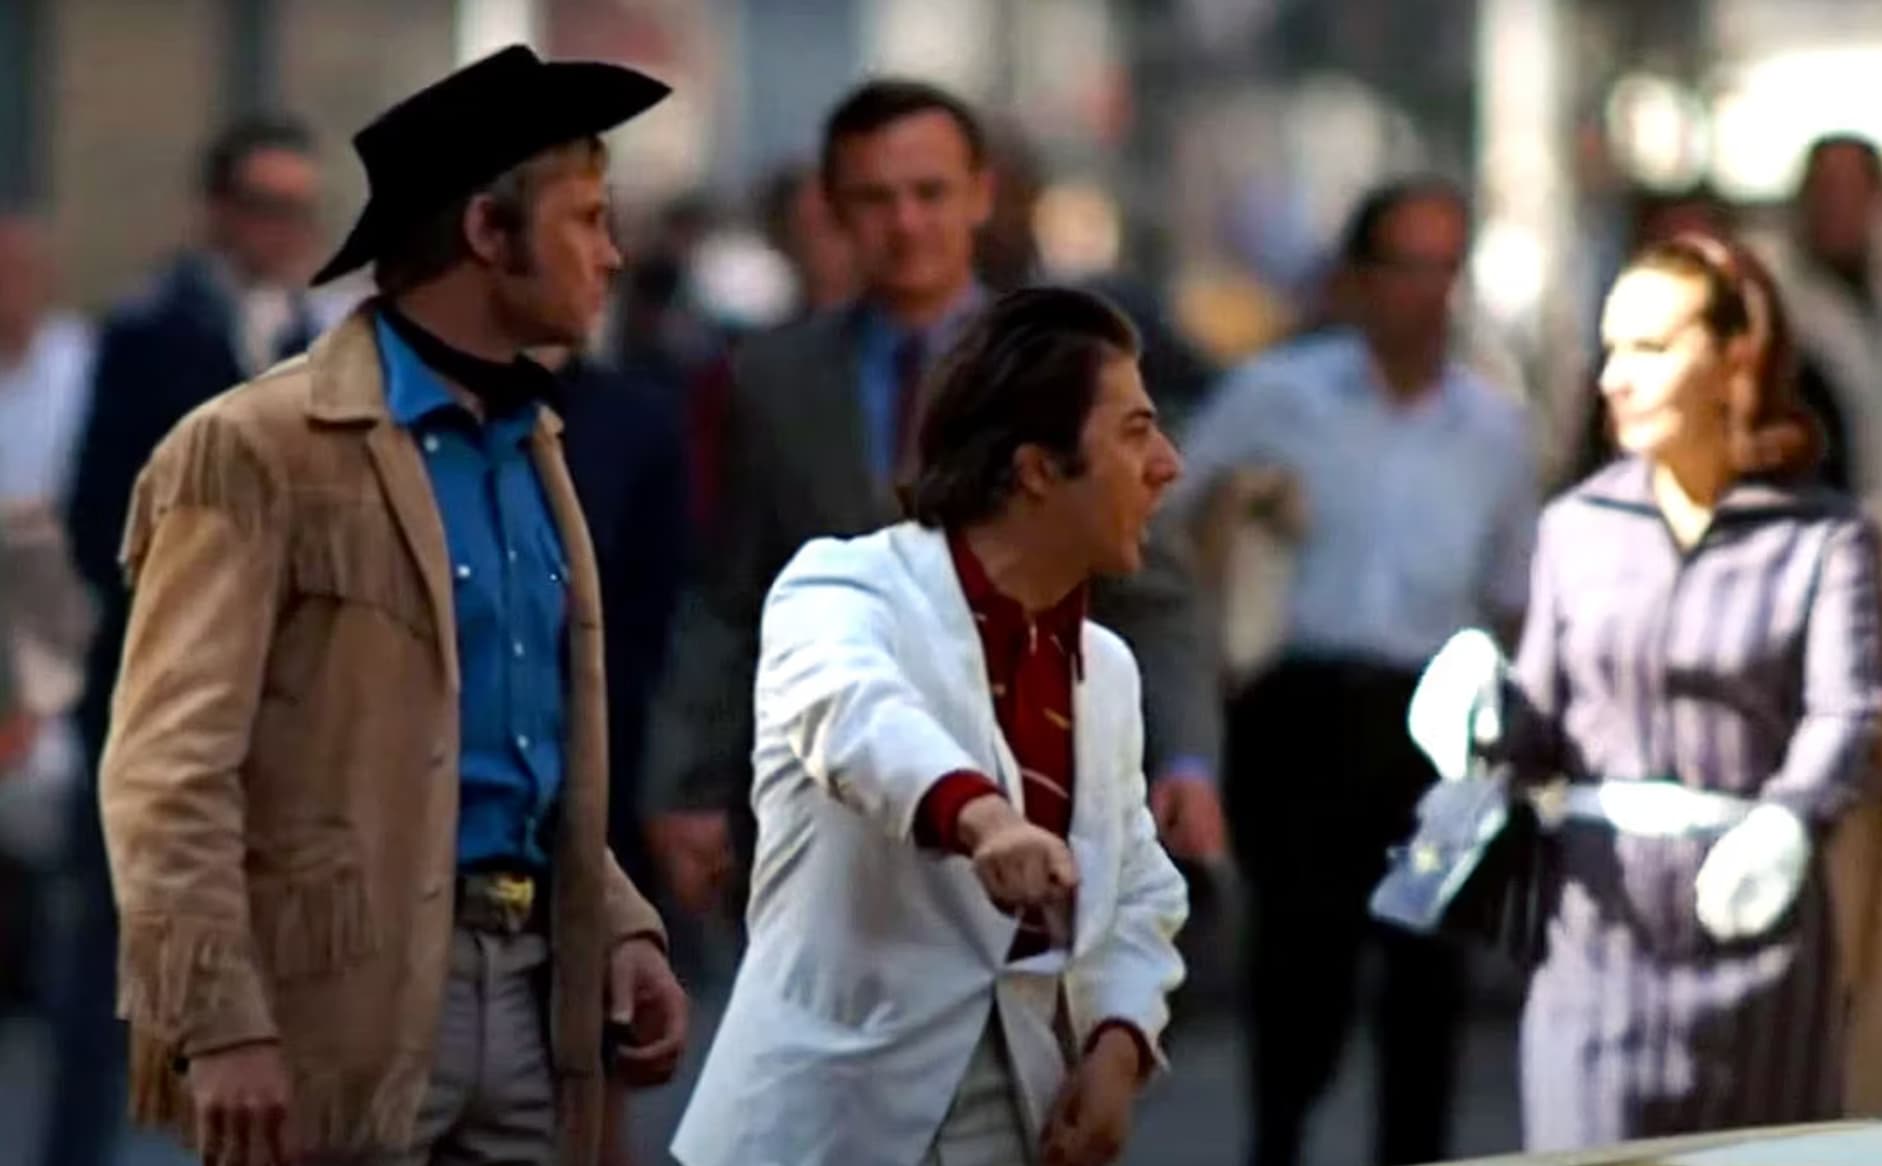 “Midnight Cowboy (1969)- The infamous scene where Dustin Hoffman yells ‘I’m walking here!’ To a cabbie as he and Jon Voight are crossing the street.”